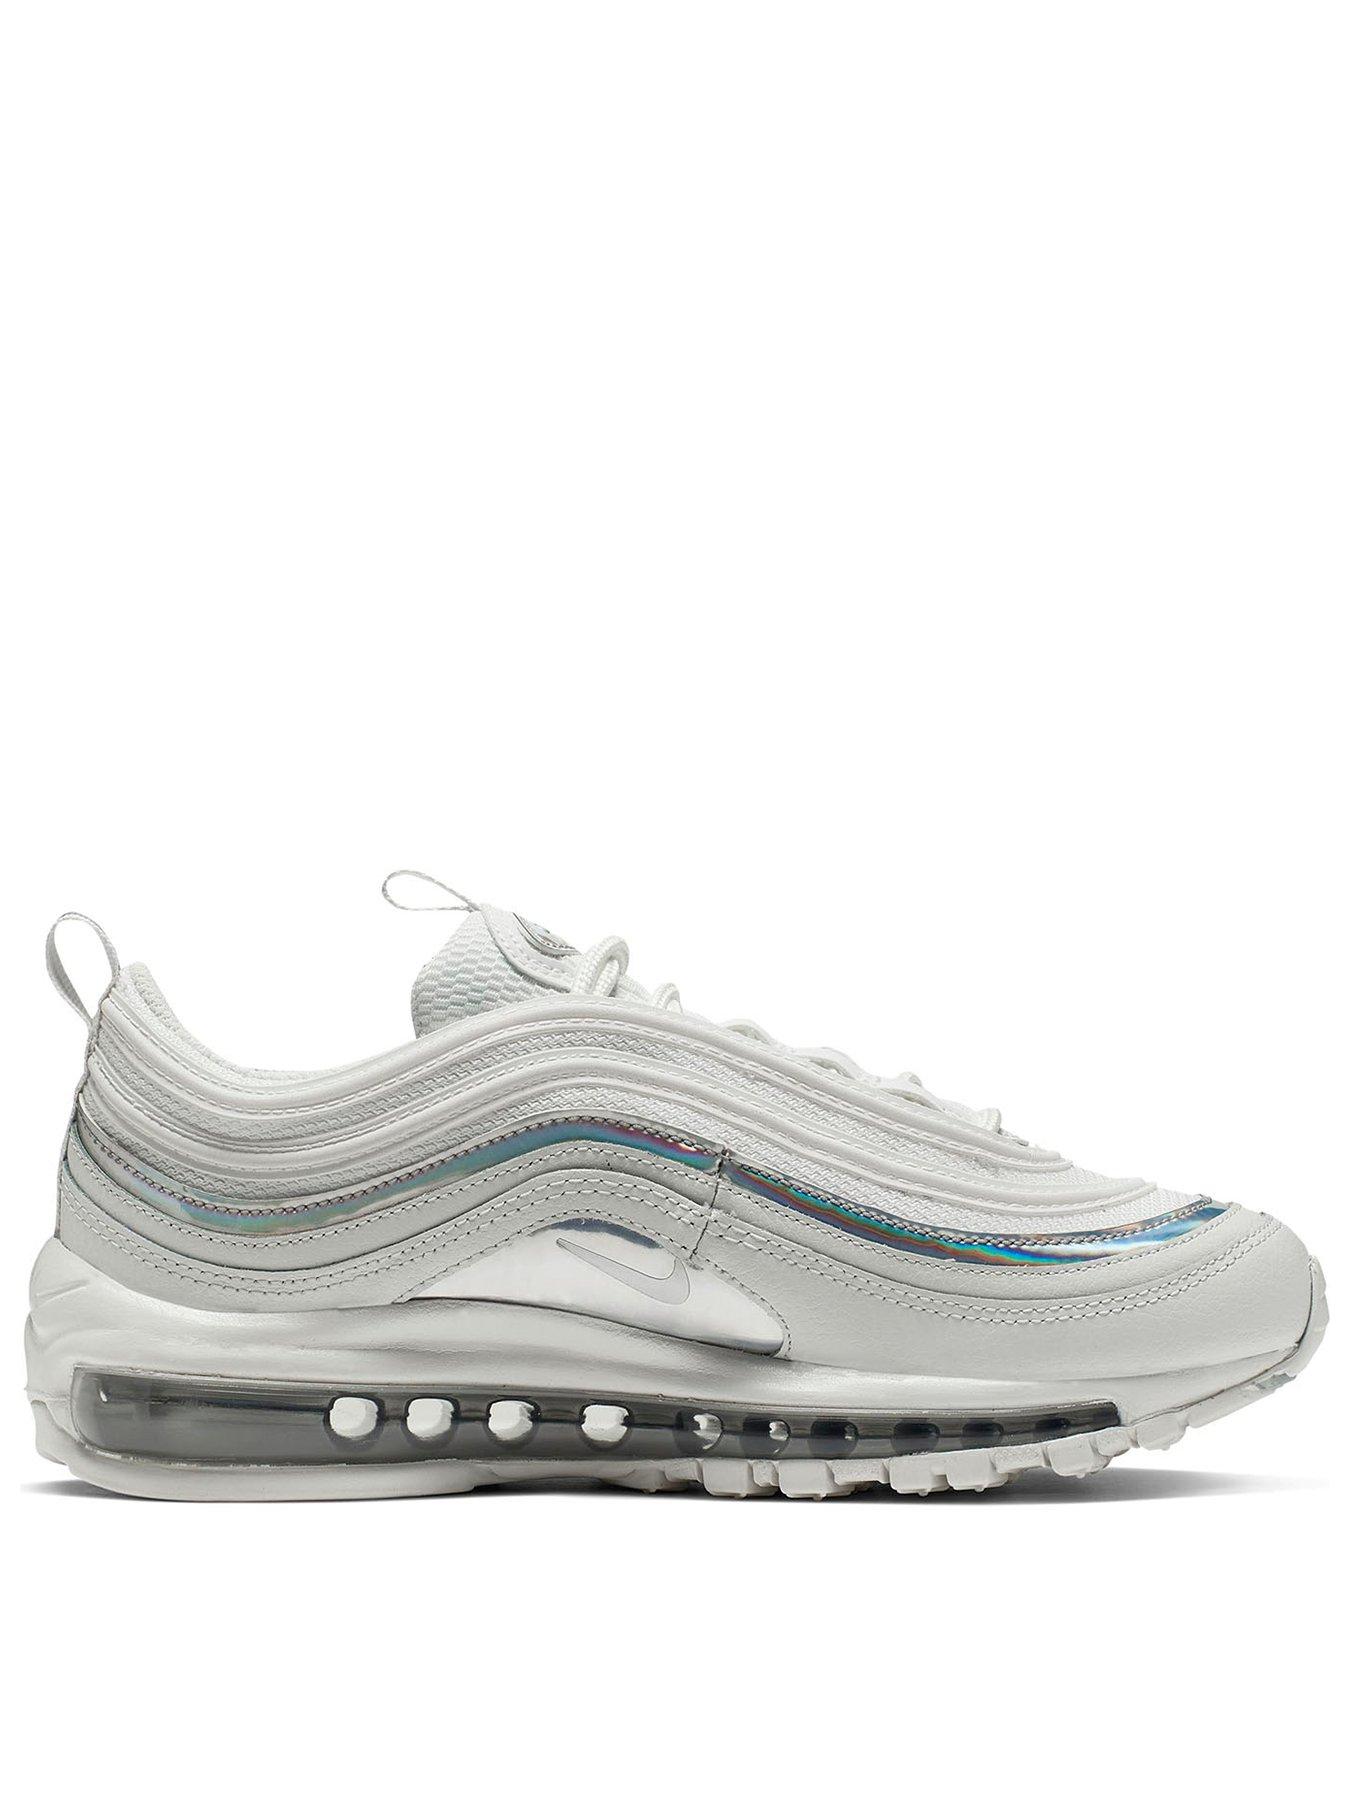 holographic air max 97